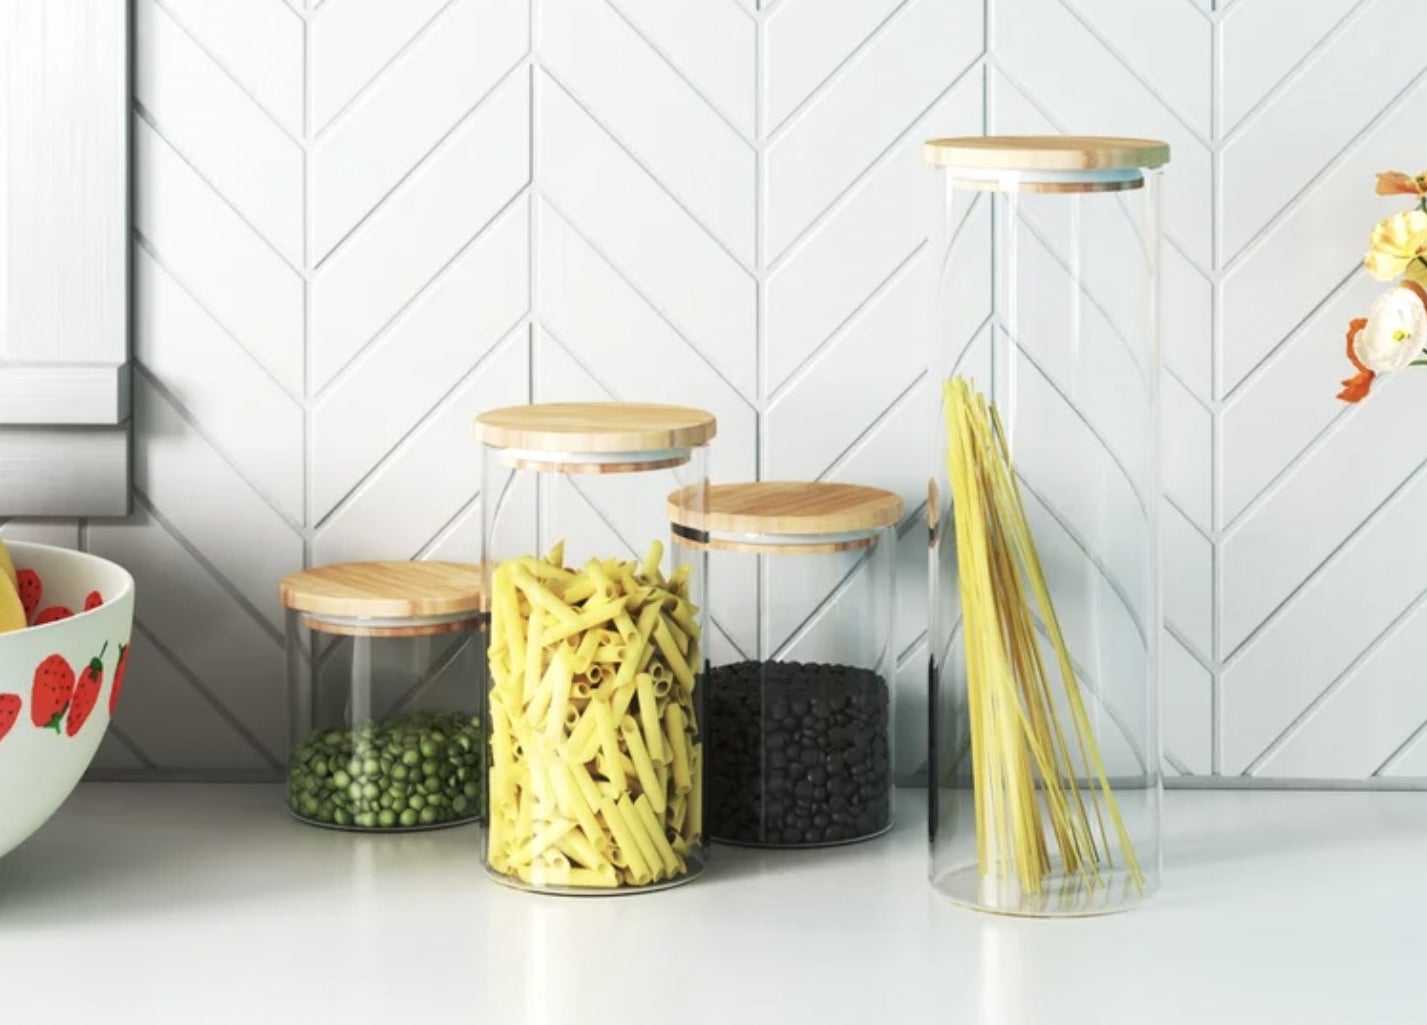 the four transparent food canisters